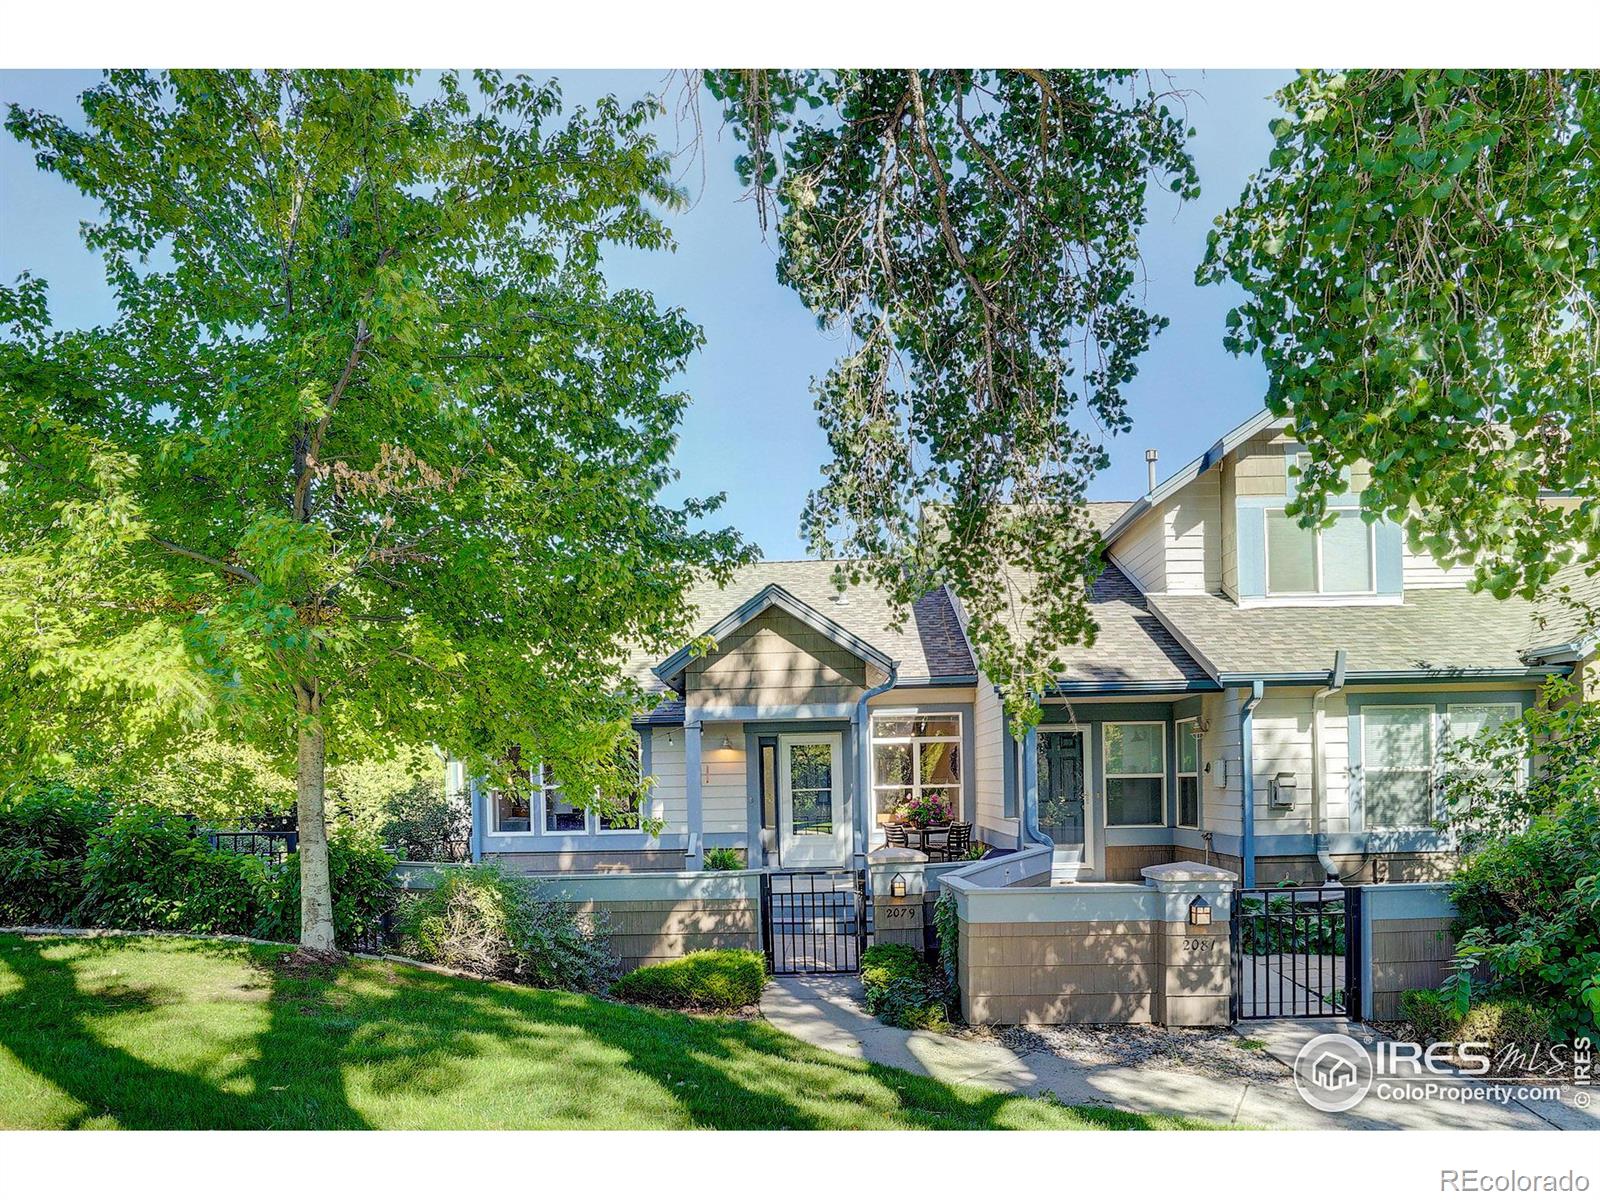 Report Image for 2079 N Fork Drive,Lafayette, Colorado